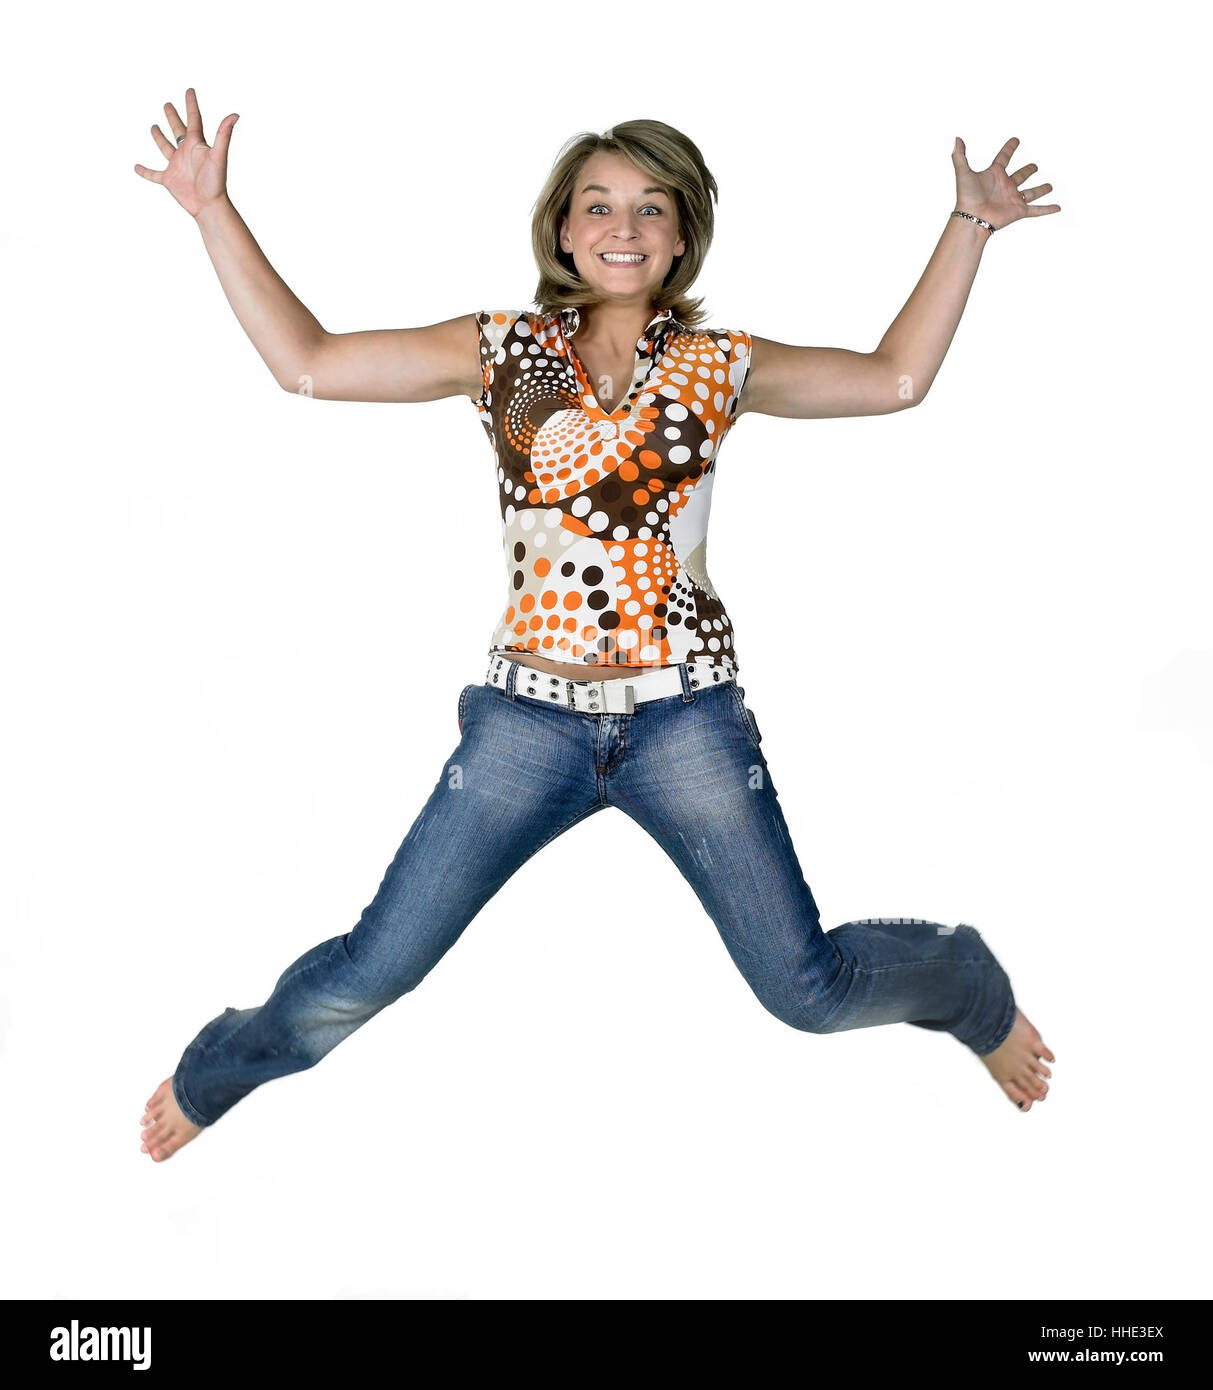 happy jumping girl isolated on white Stock Photo